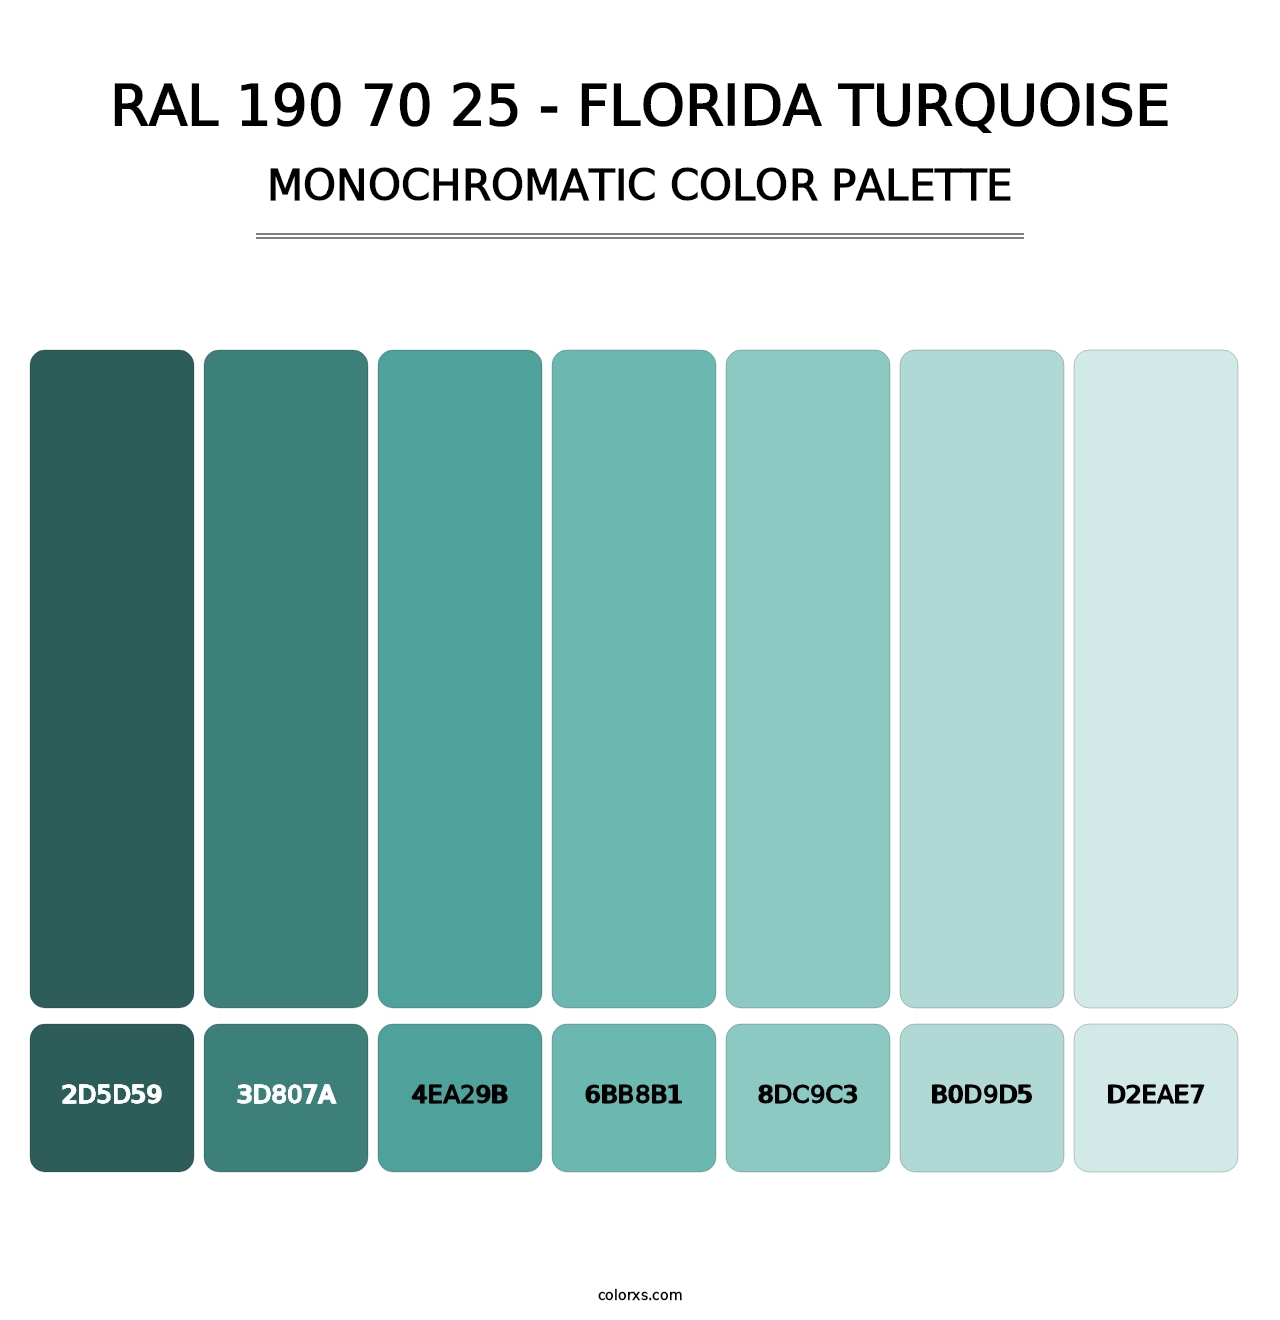 RAL 190 70 25 - Florida Turquoise - Monochromatic Color Palette